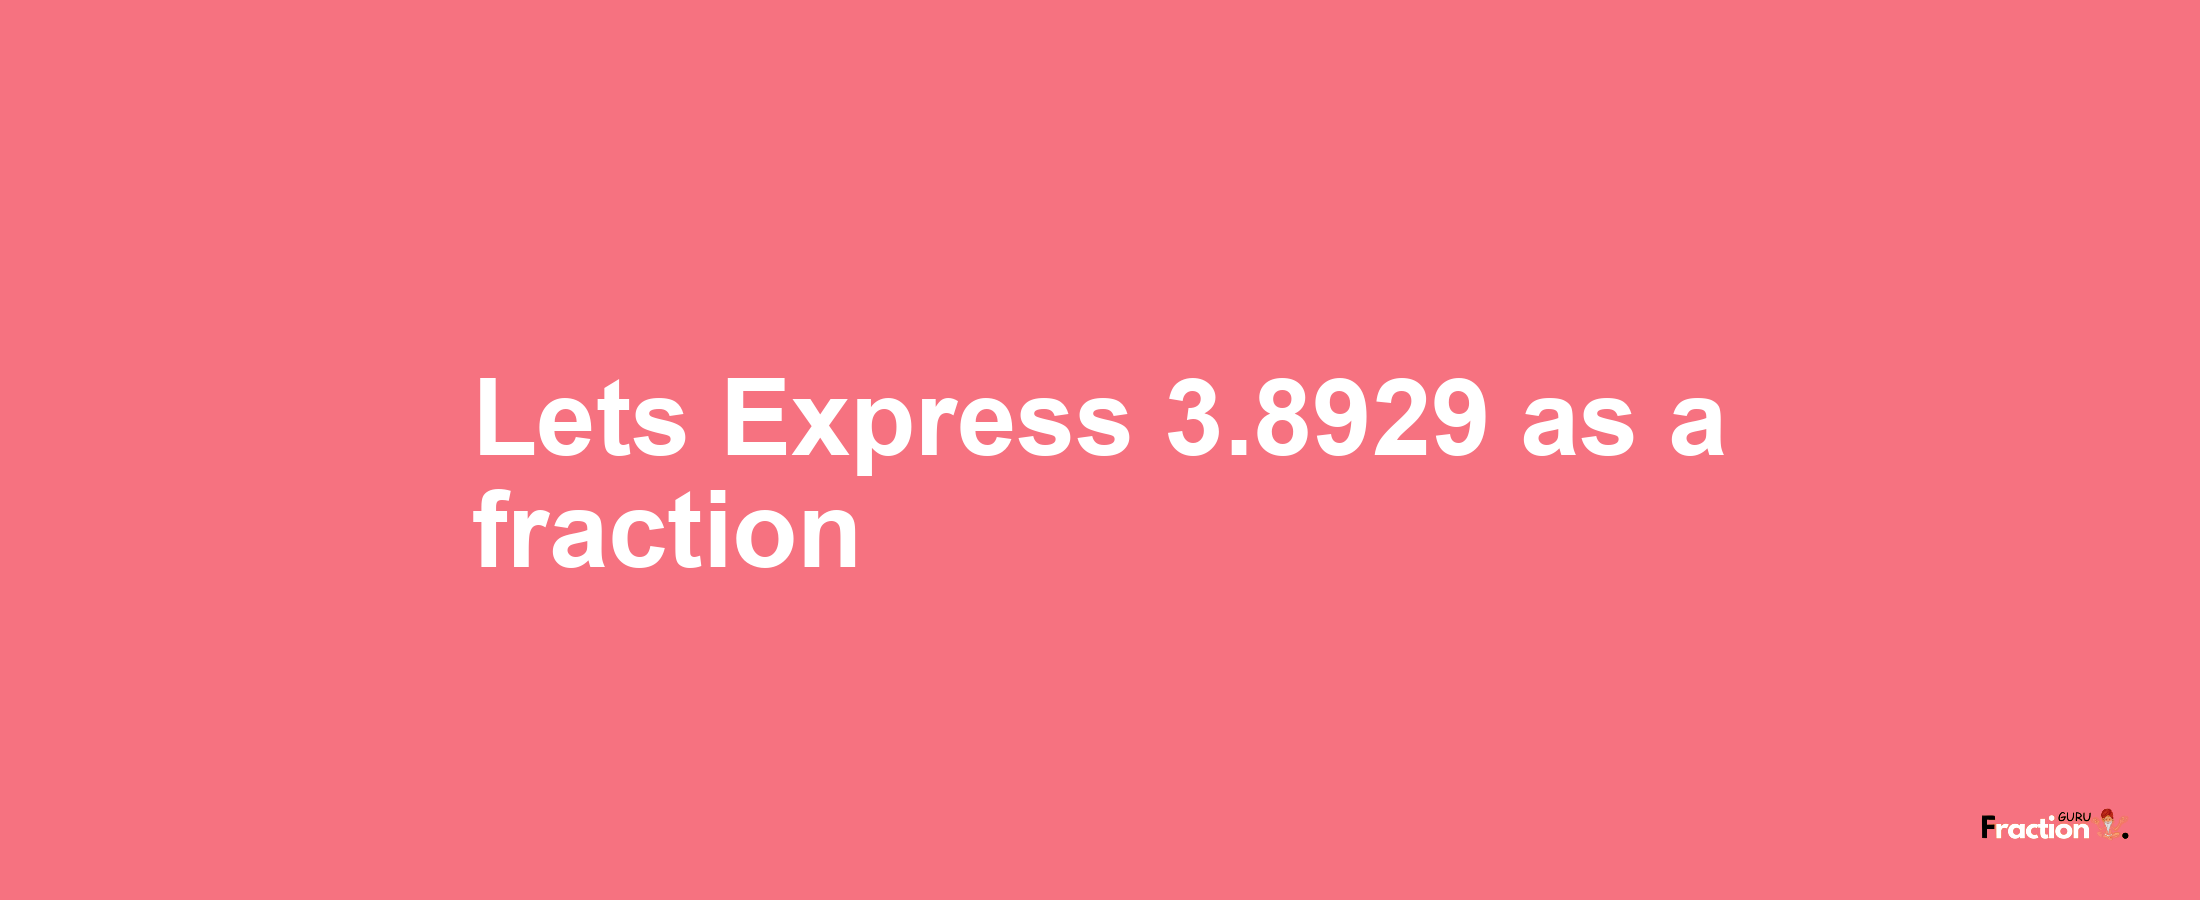 Lets Express 3.8929 as afraction